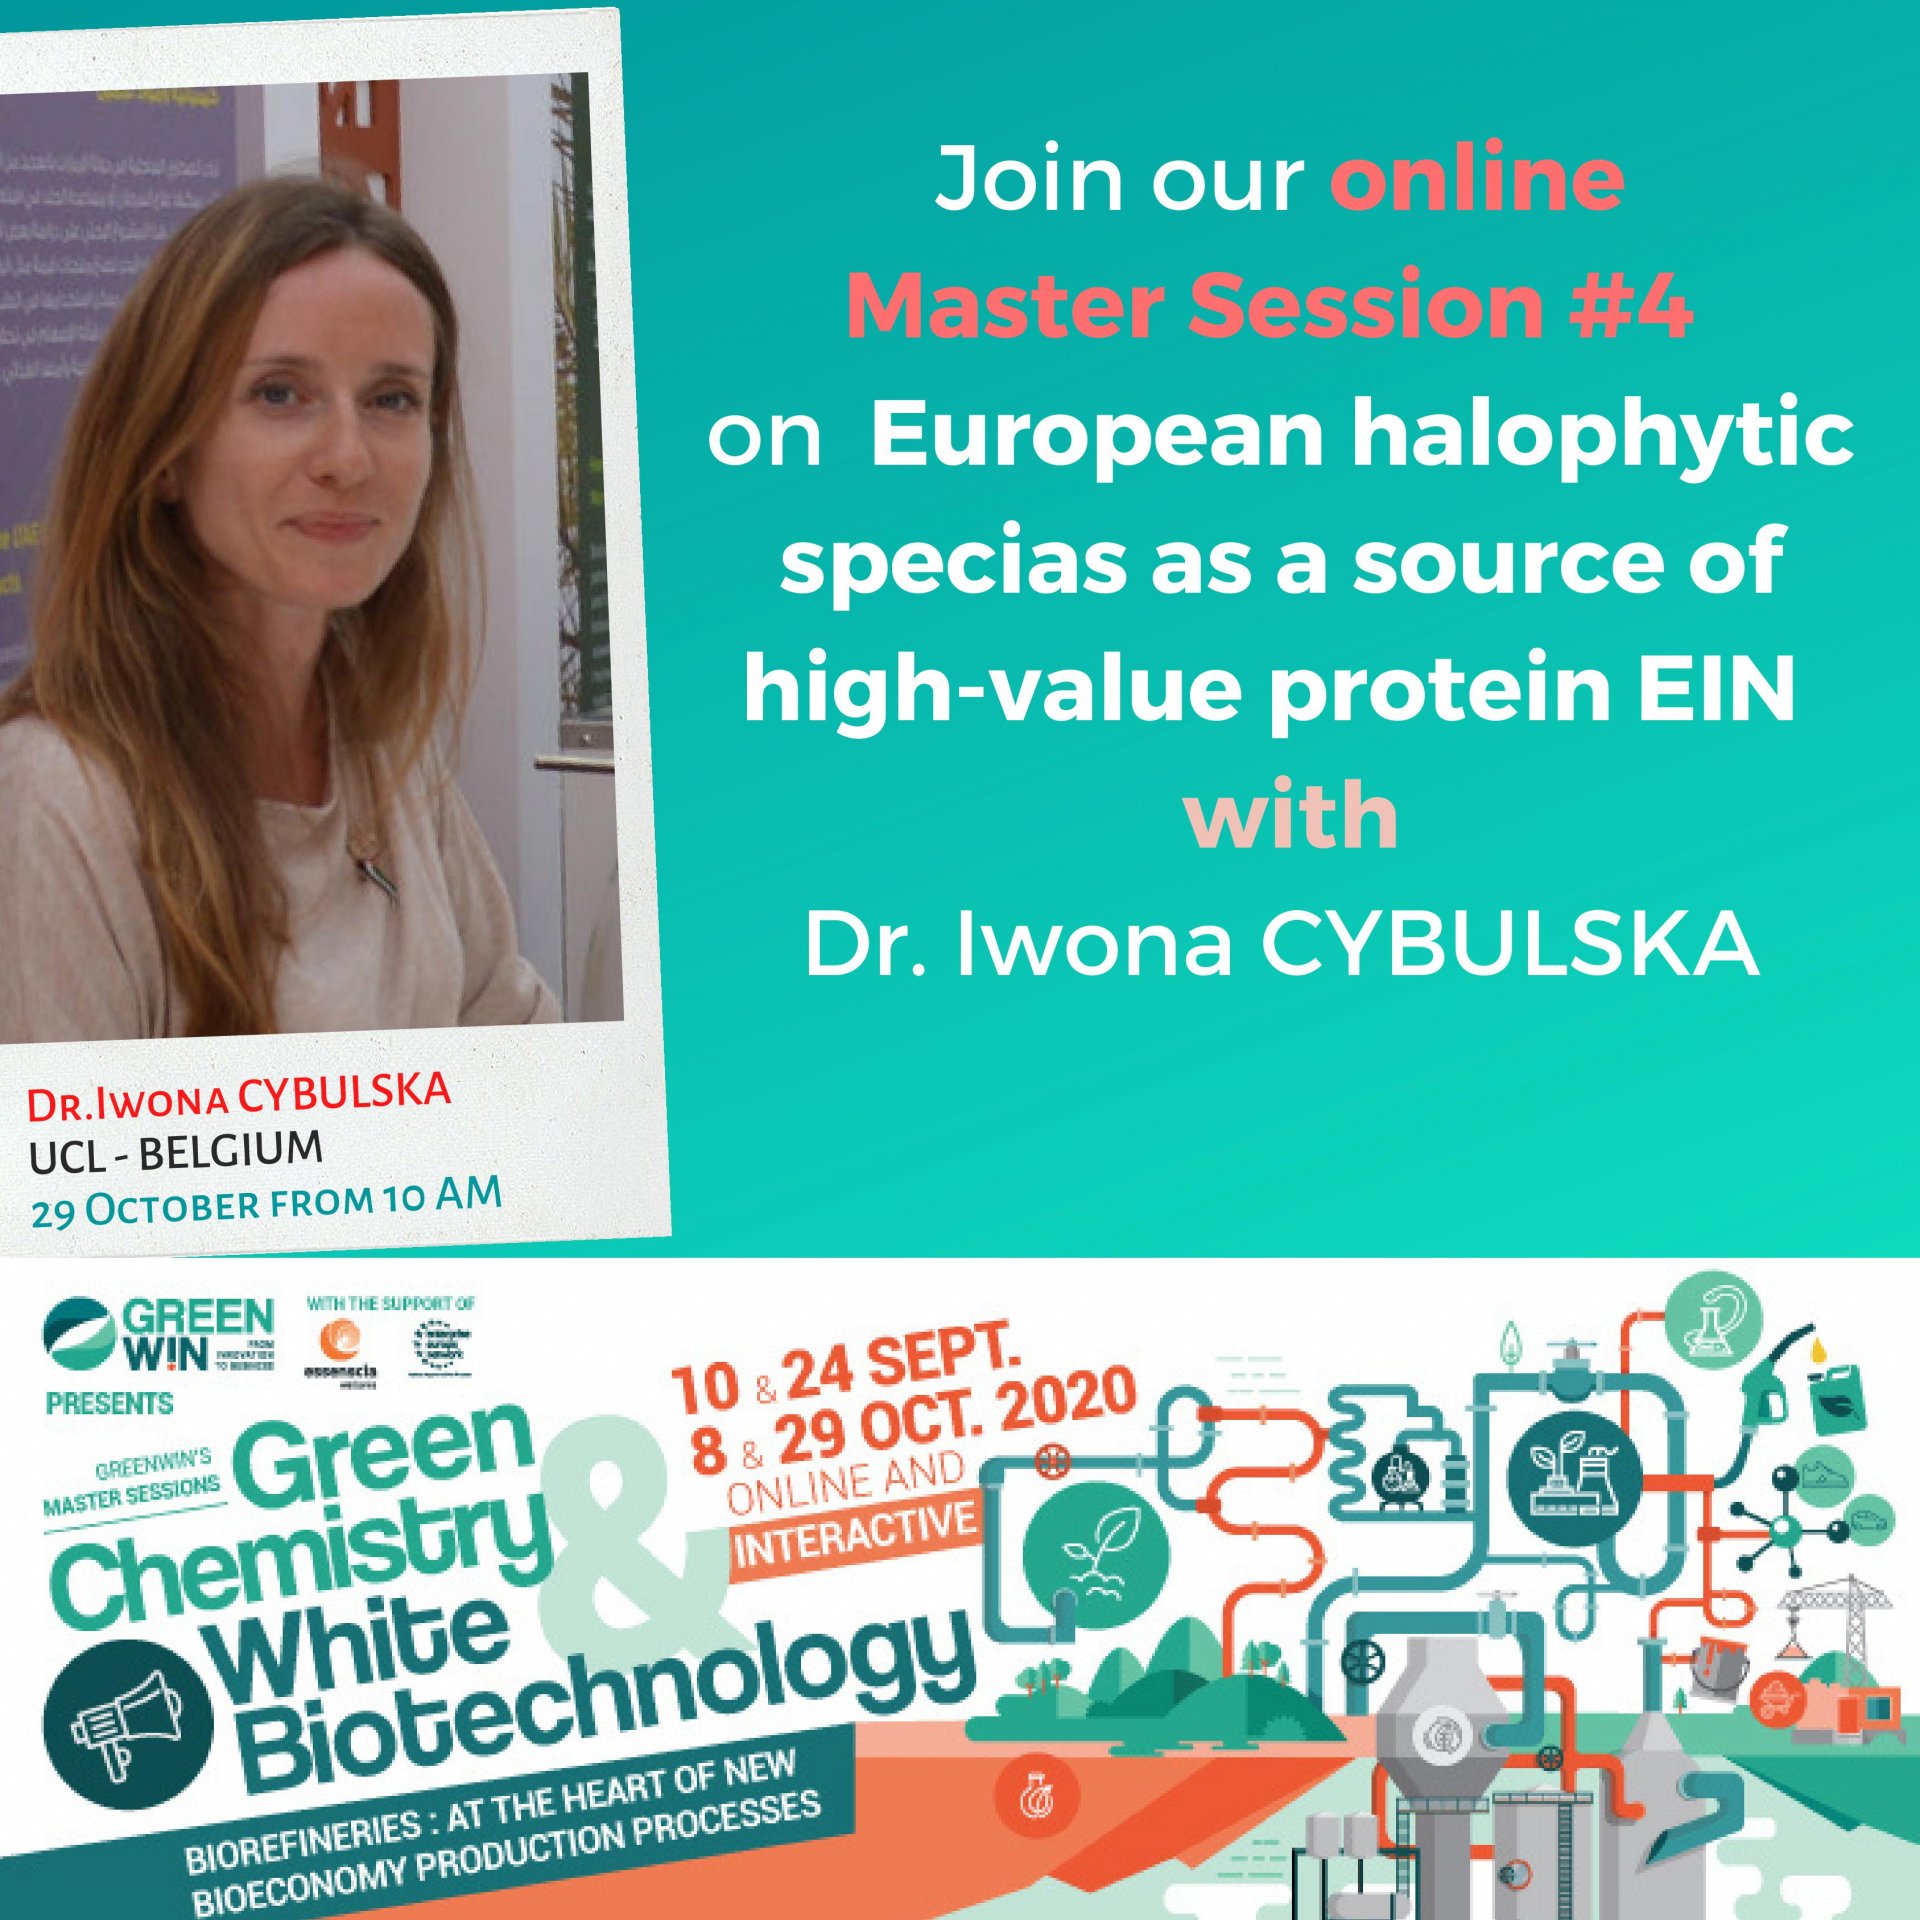 Meet Dr Iwona CYBULSKA from UCLouvain at our online Master Session #4 (the last one!) on 29 October 2020 at 10AM